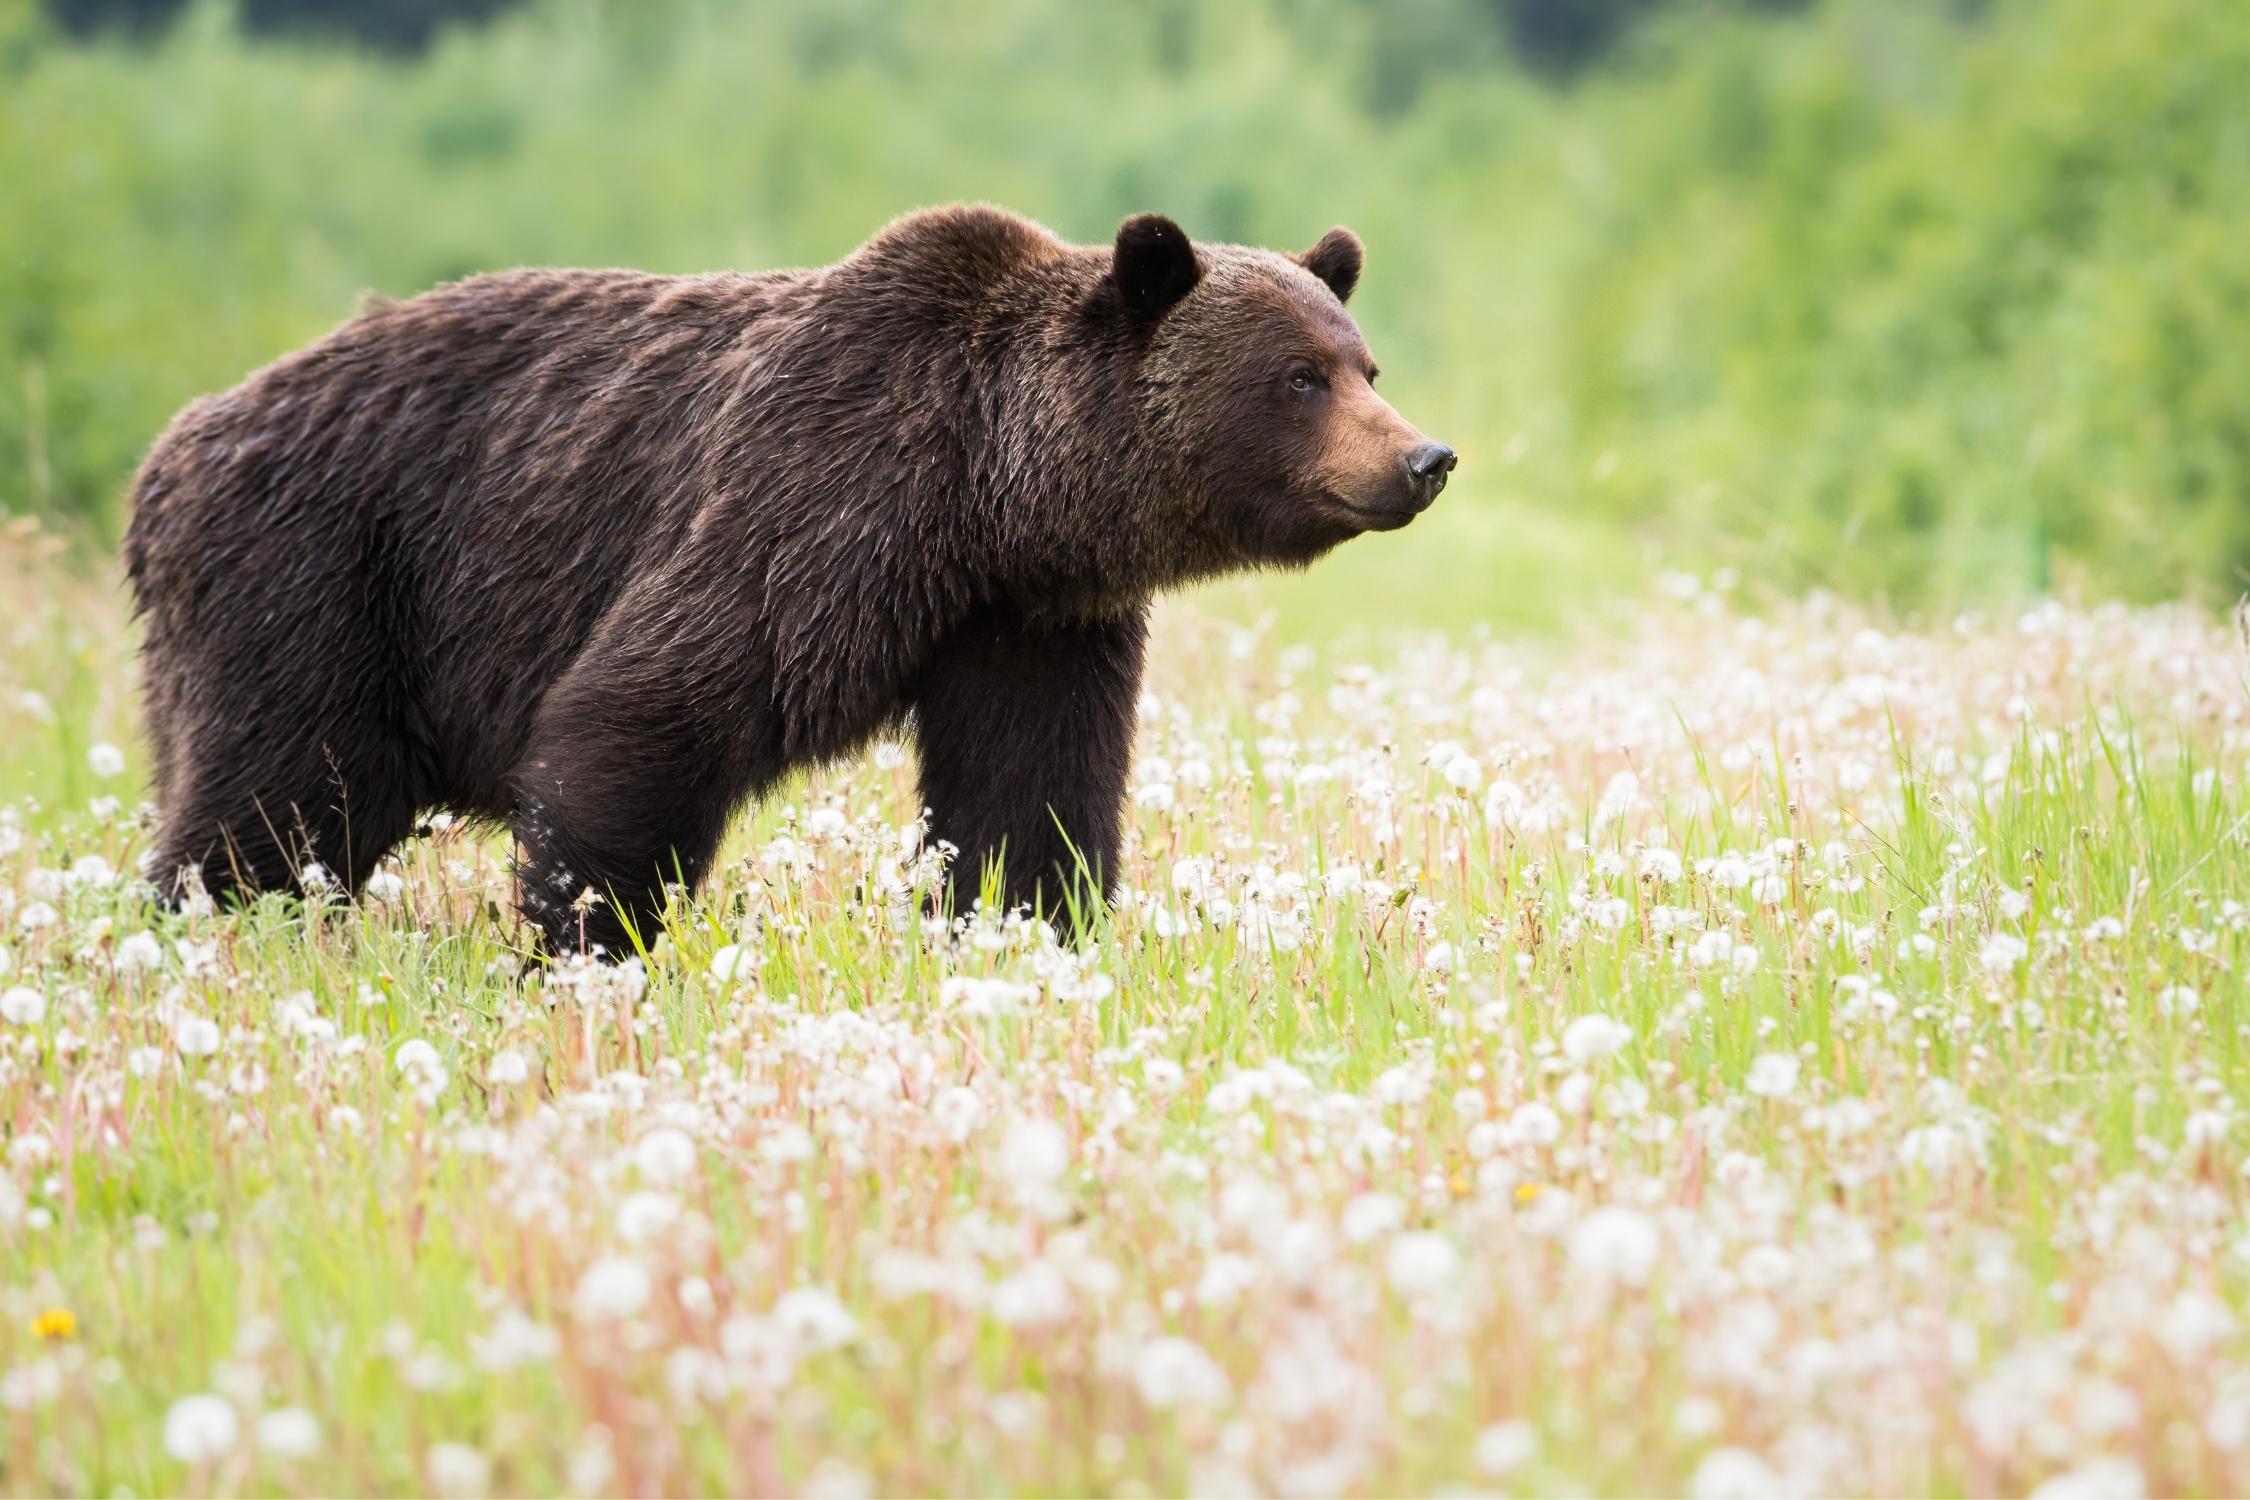 A grizzly bear looks off in the distance in a field of flowers